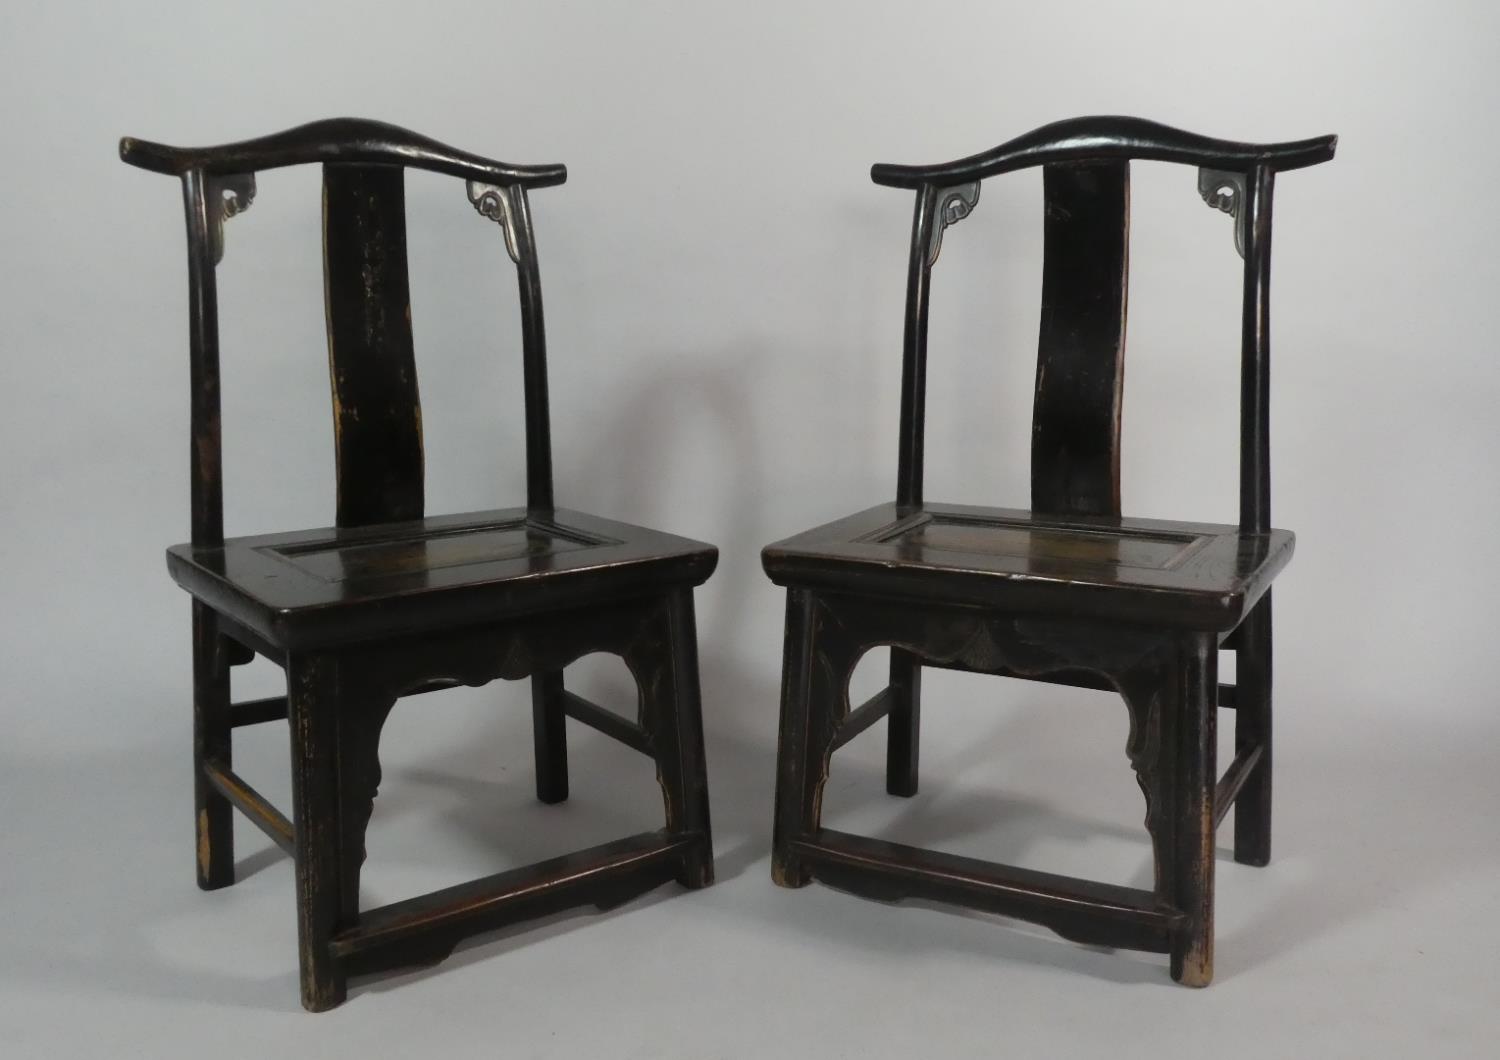 A Pair of 19th Century Ebonised Chinese Scholar's Chairs of Ming Design.